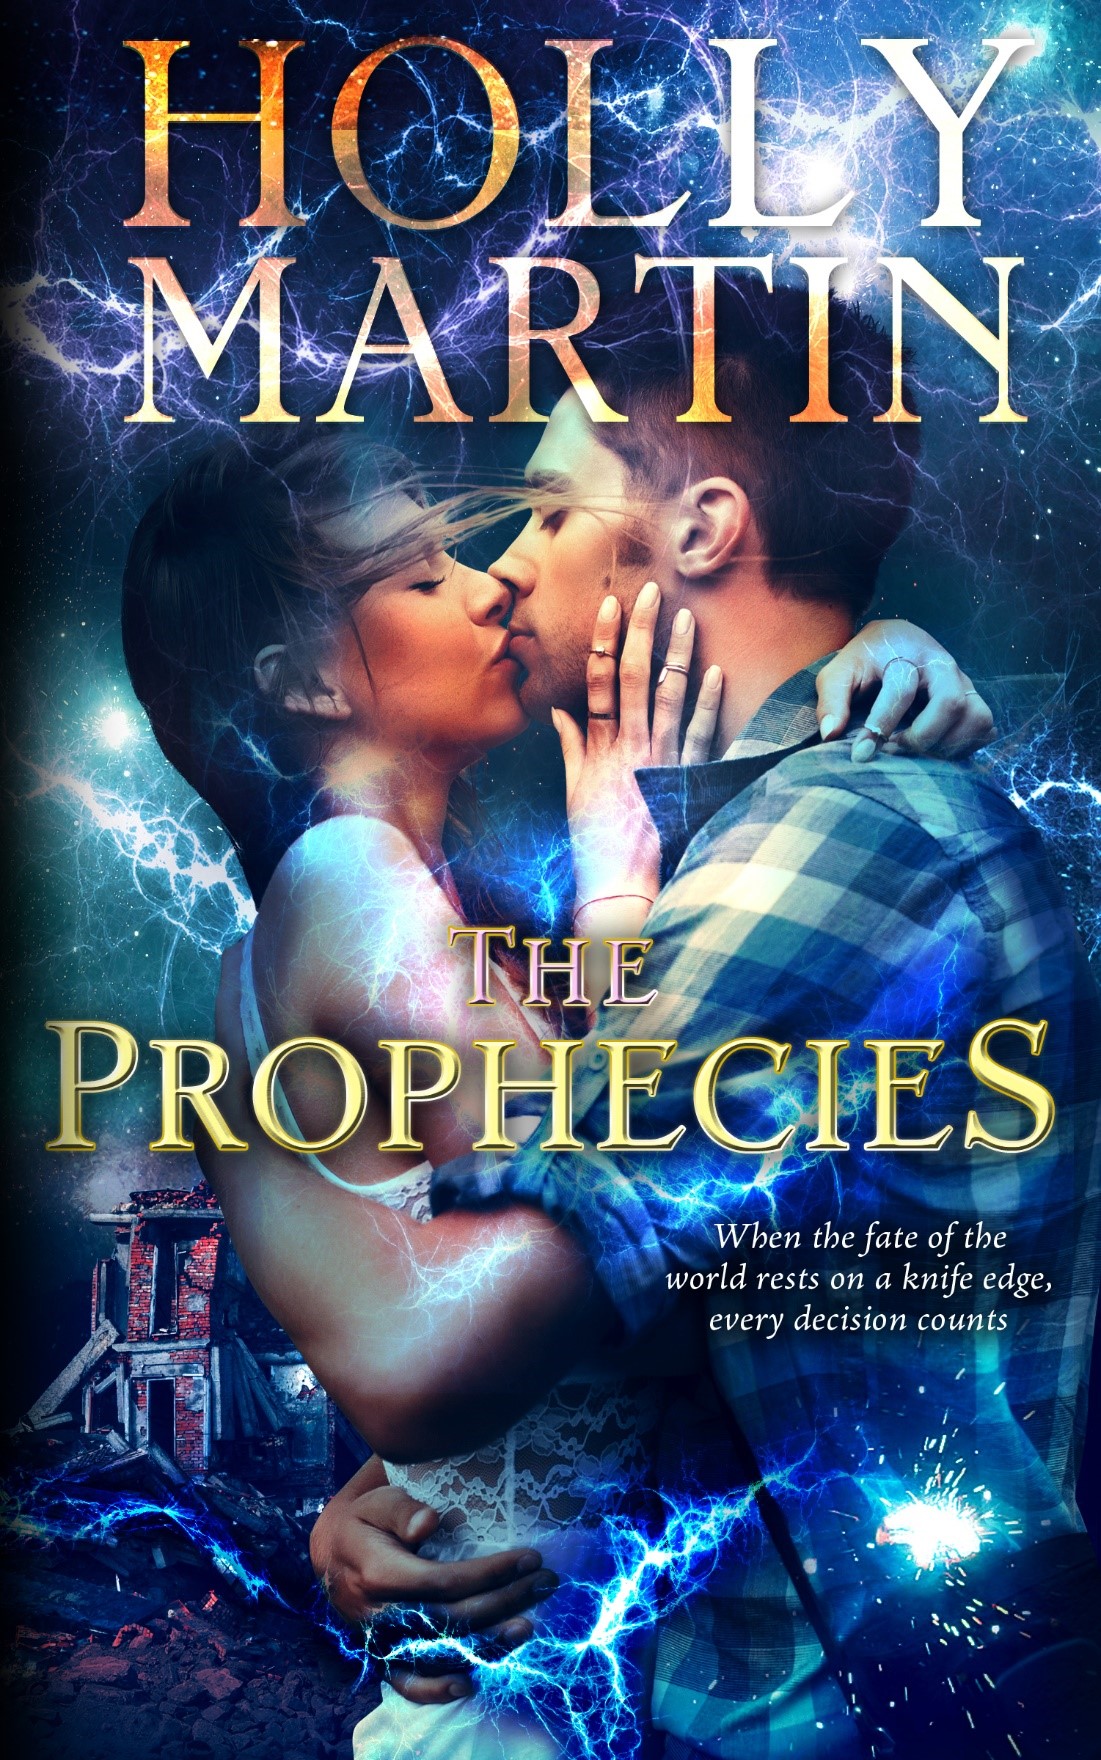 Cover reveal for Holly Martin with The Prophecy Book 2